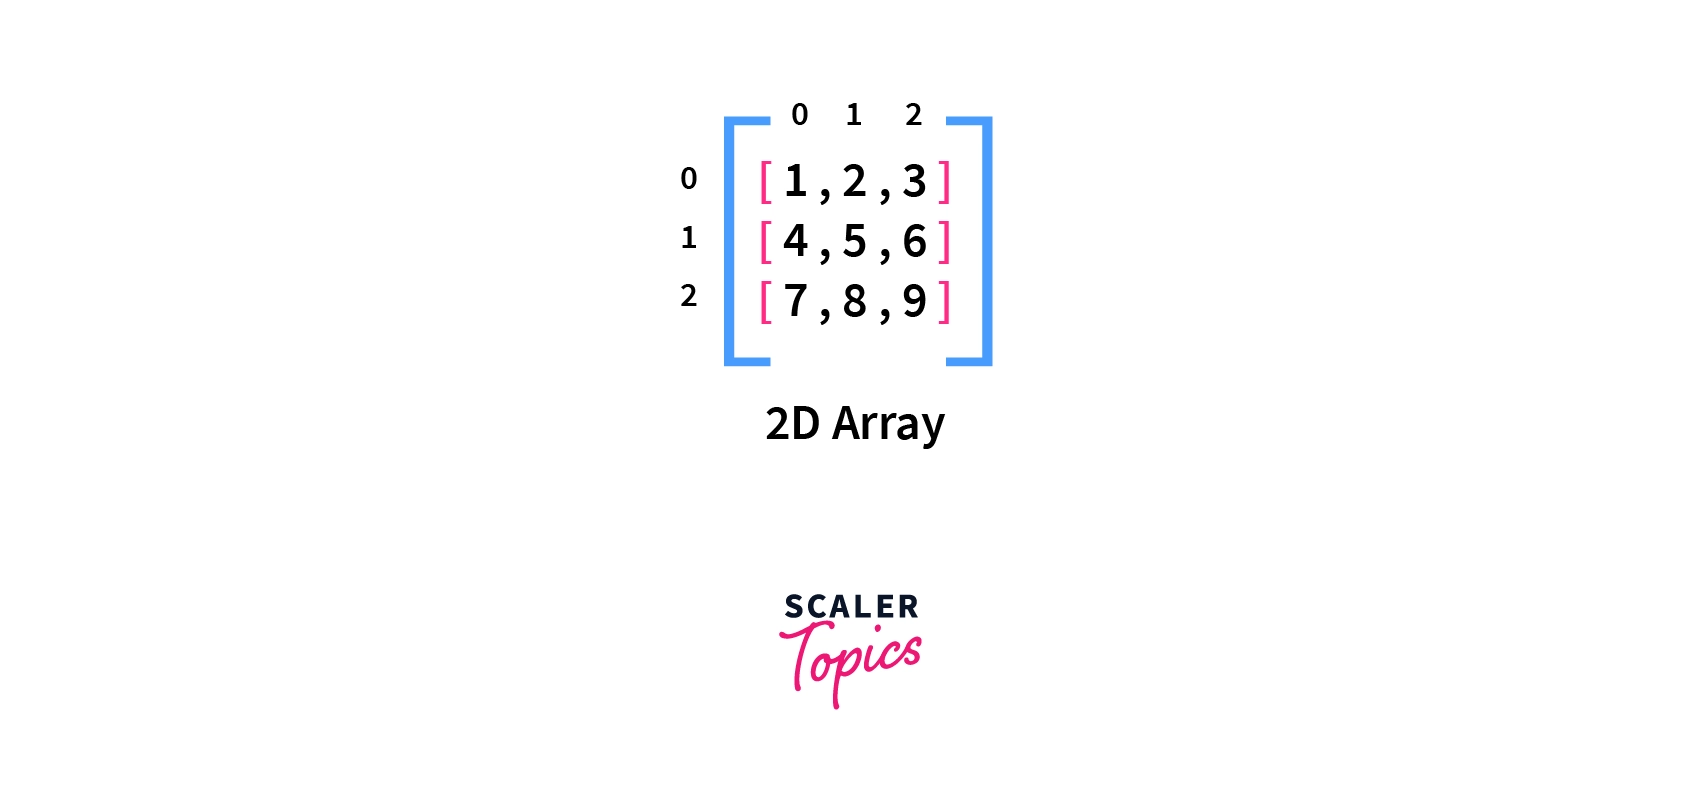 A 2D Array in Python